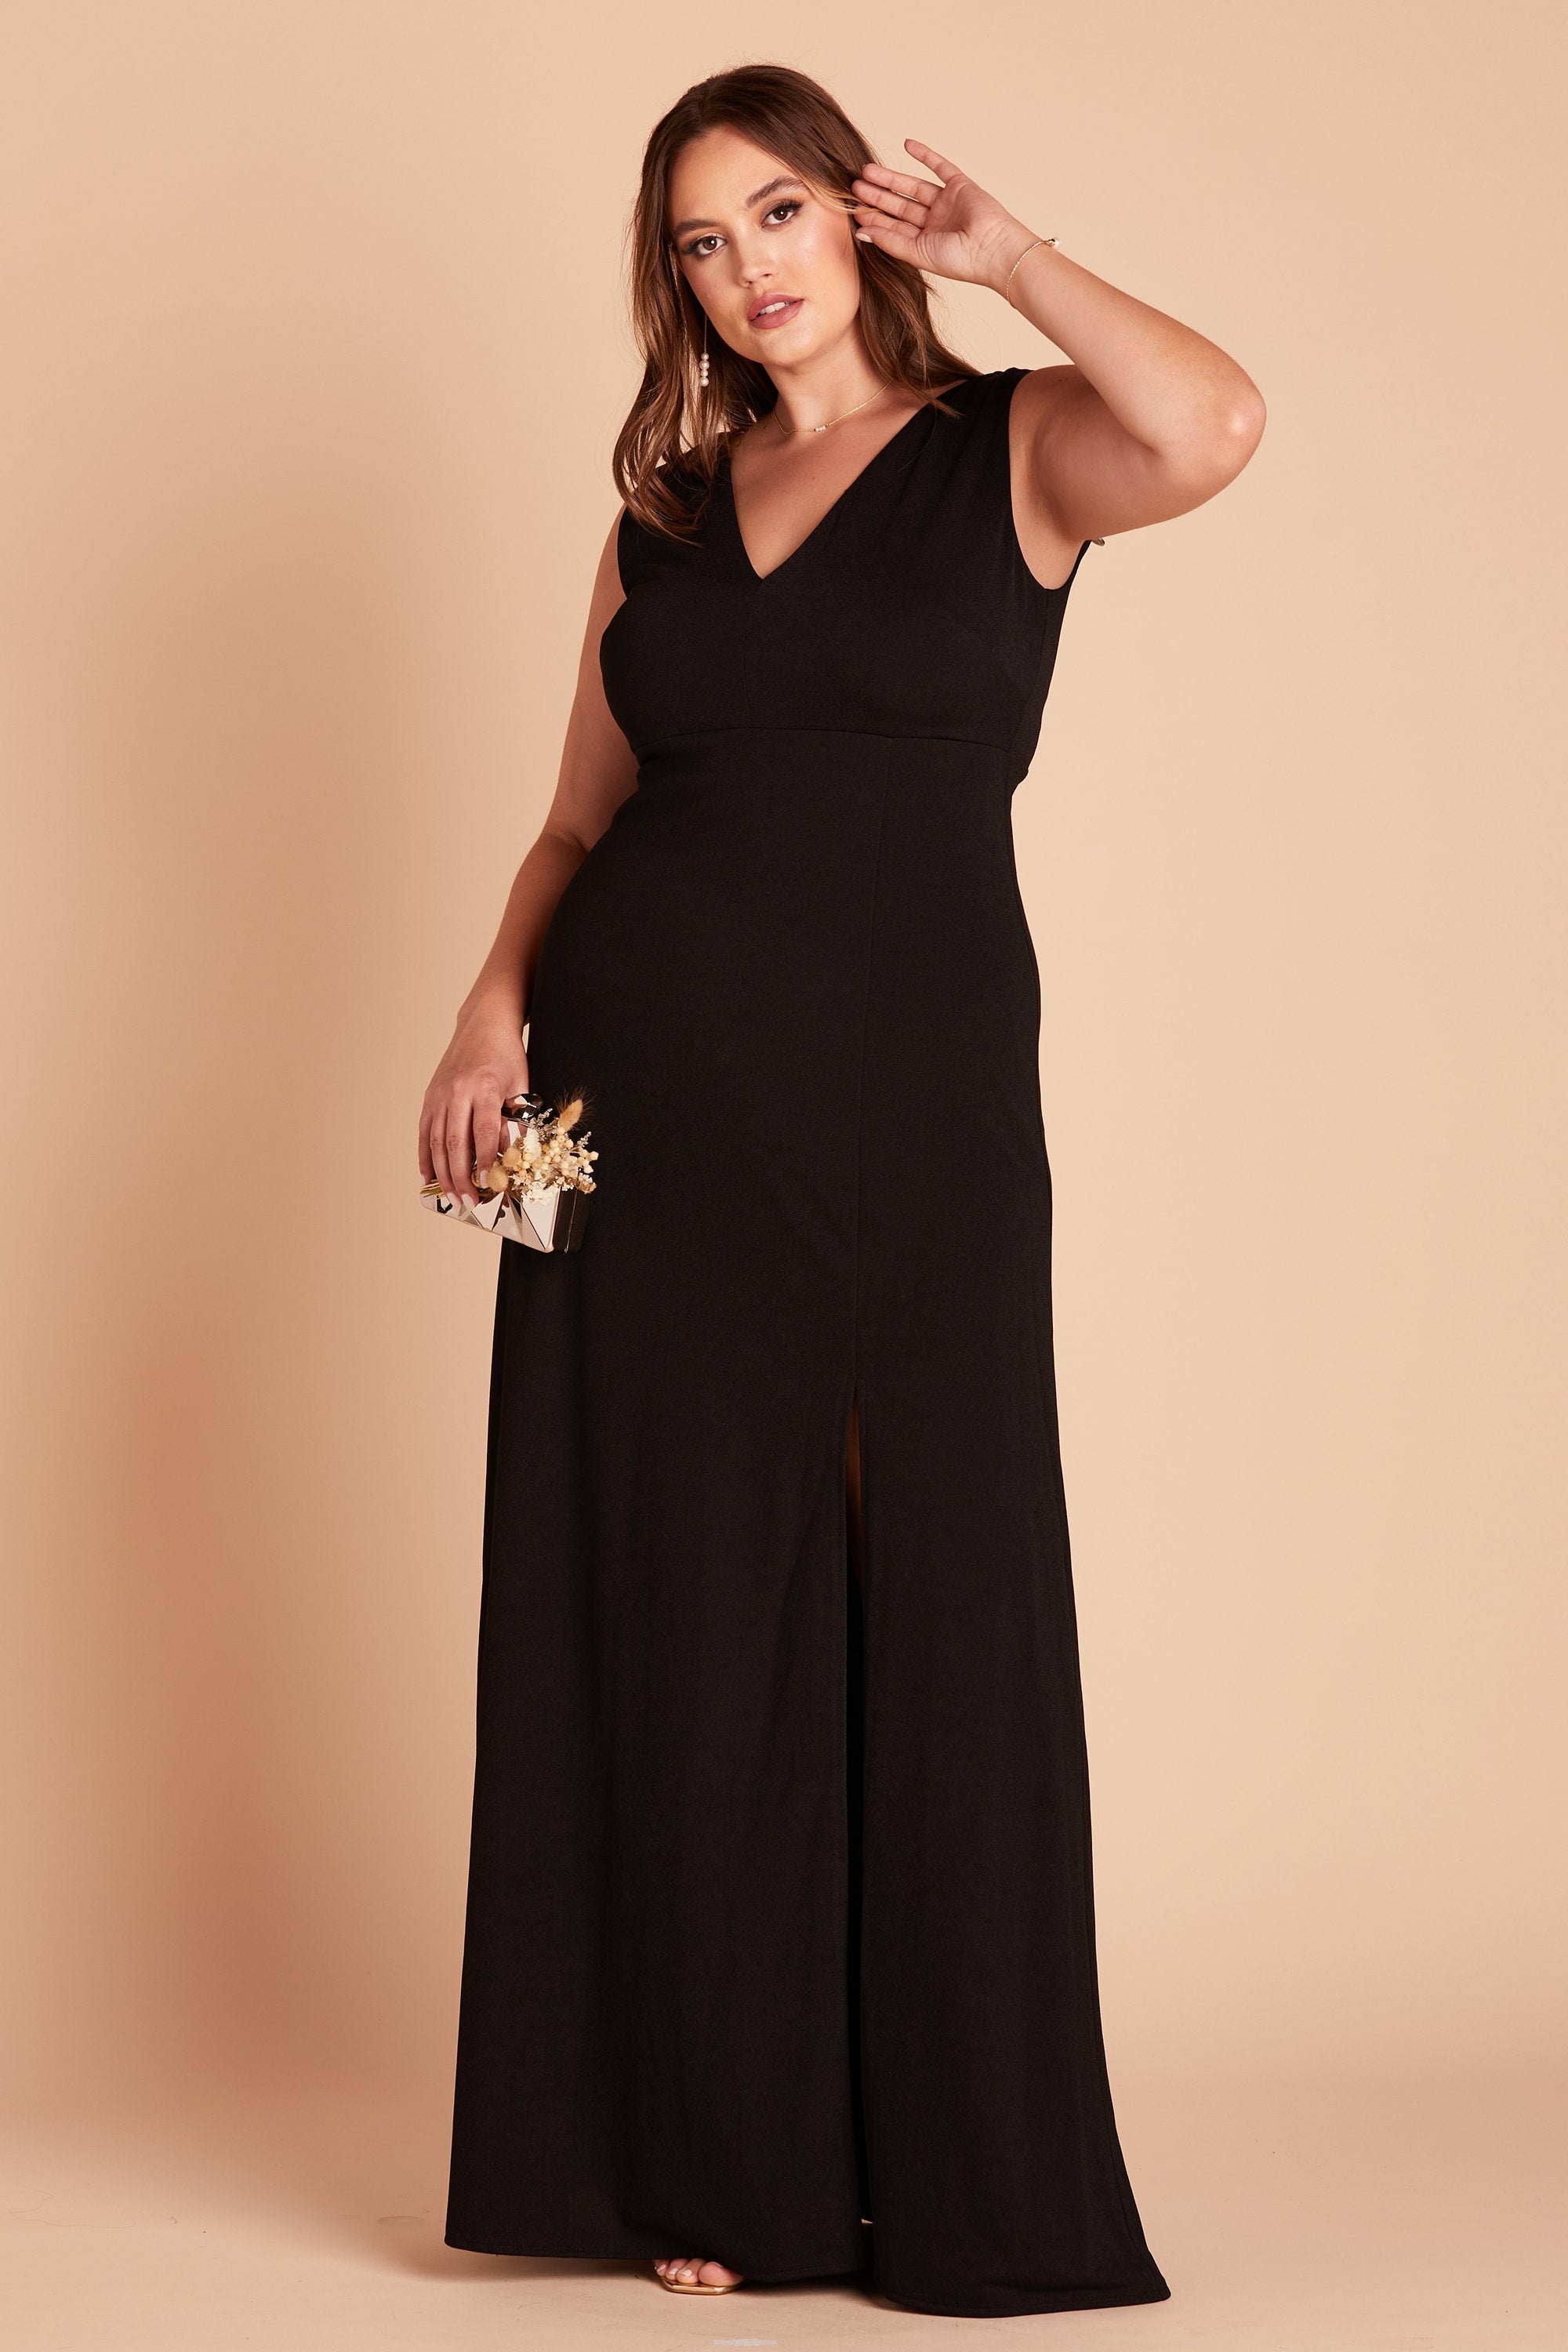 Shamin plus size bridesmaid dress in black crepe by Birdy Grey, front view